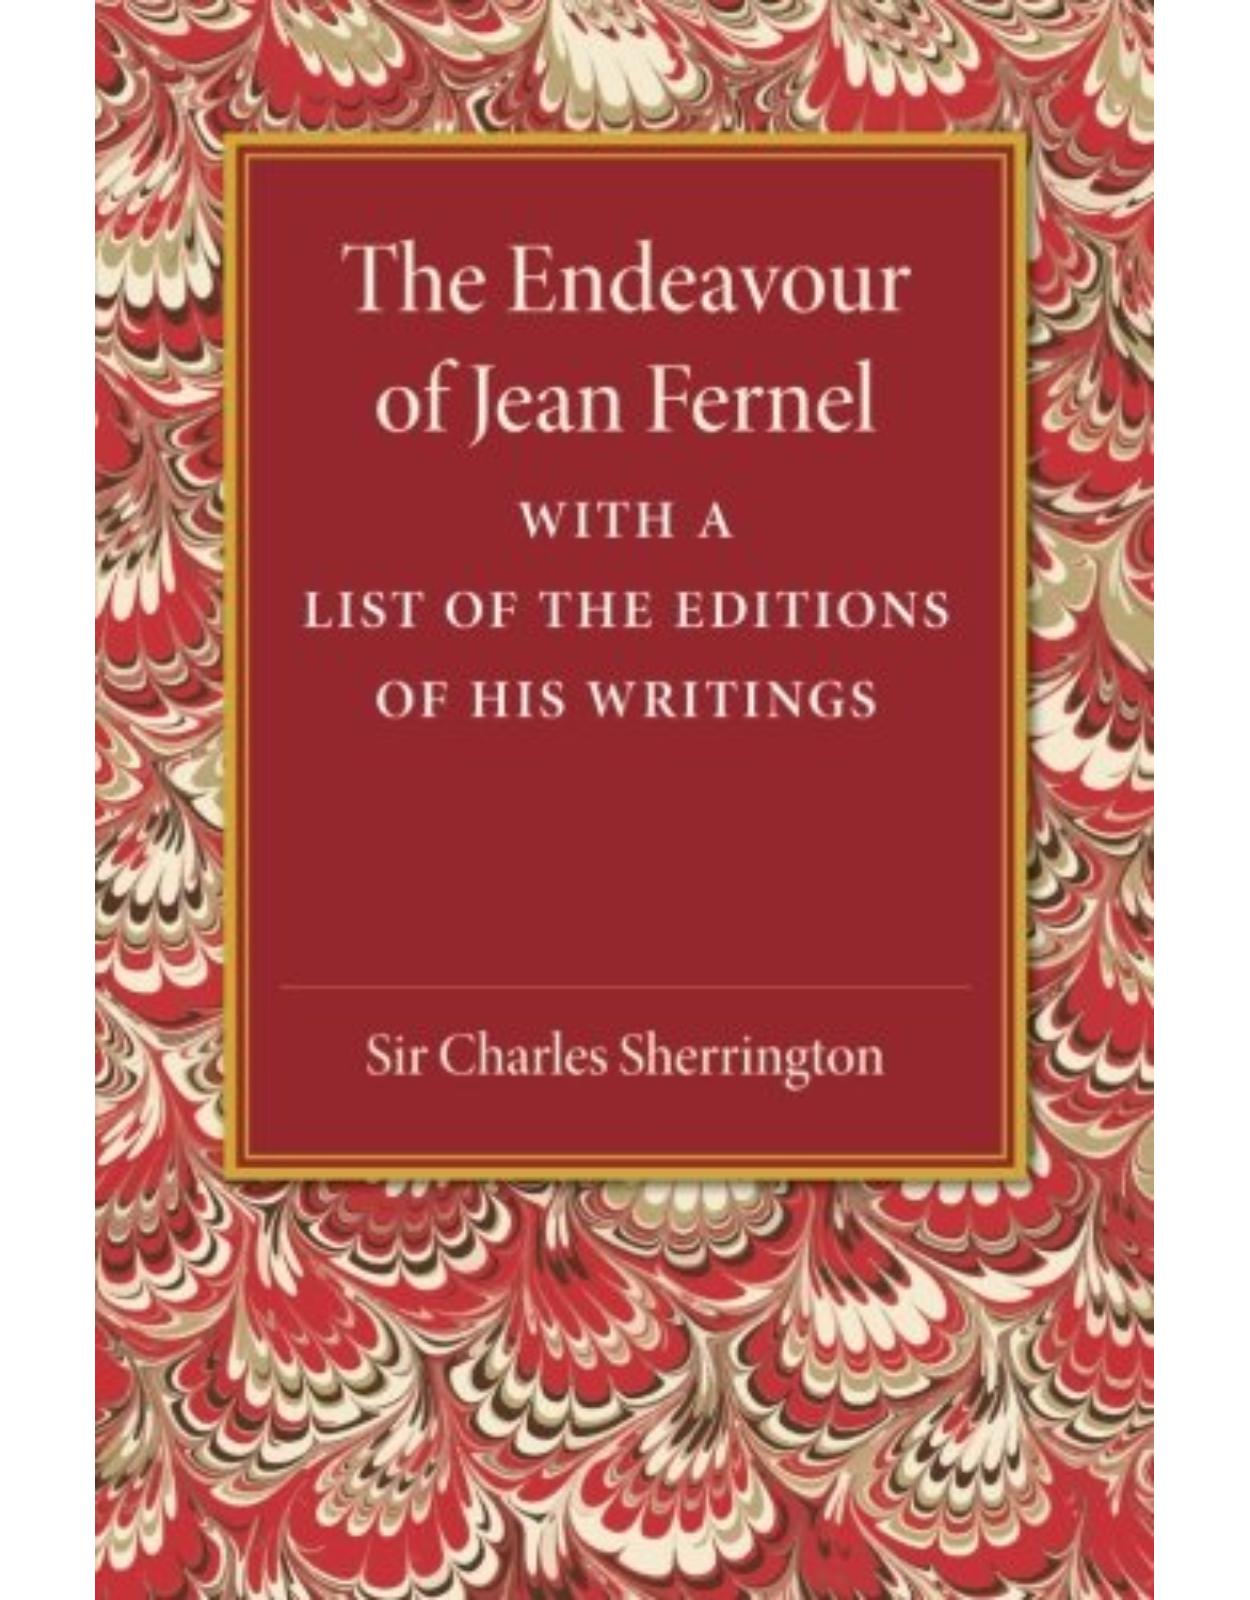 The Endeavour of Jean Fernel: With a List of the Editions of his Writings